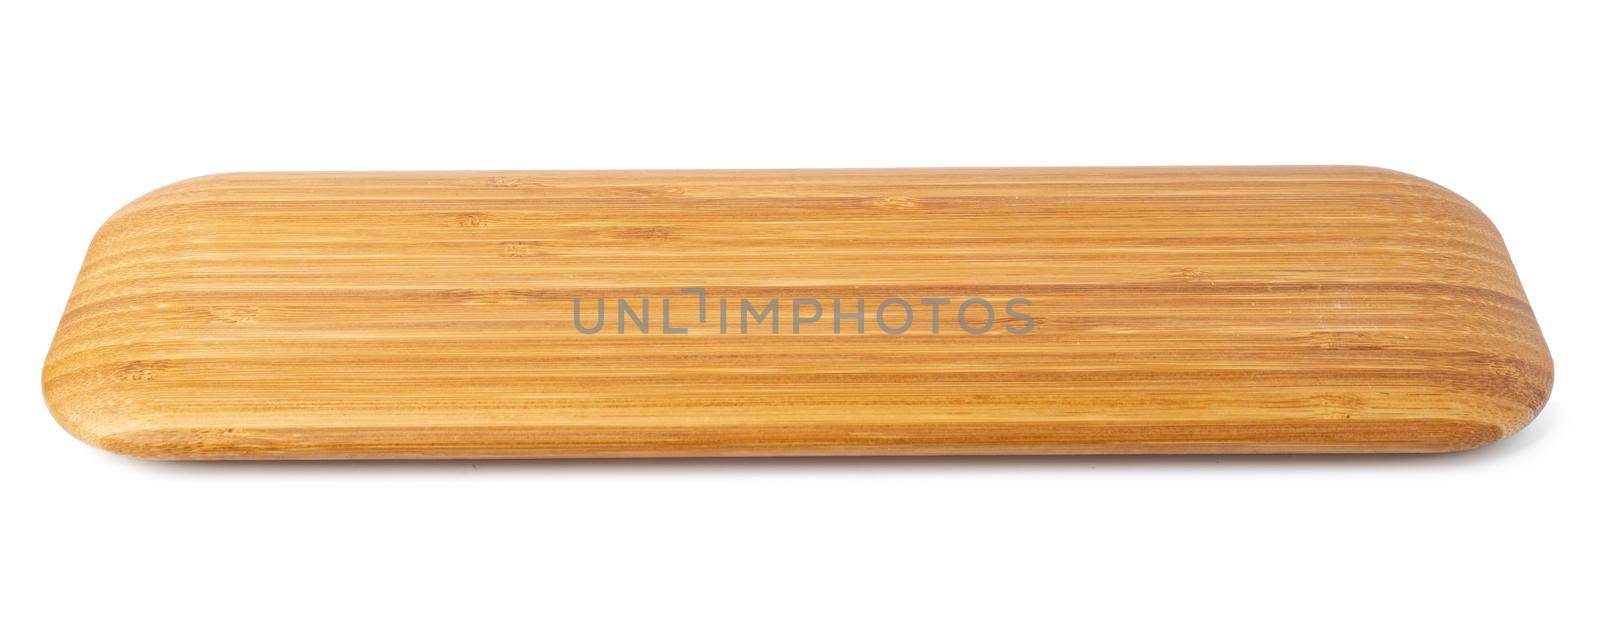 Wooden board isolated on white background, close up photo